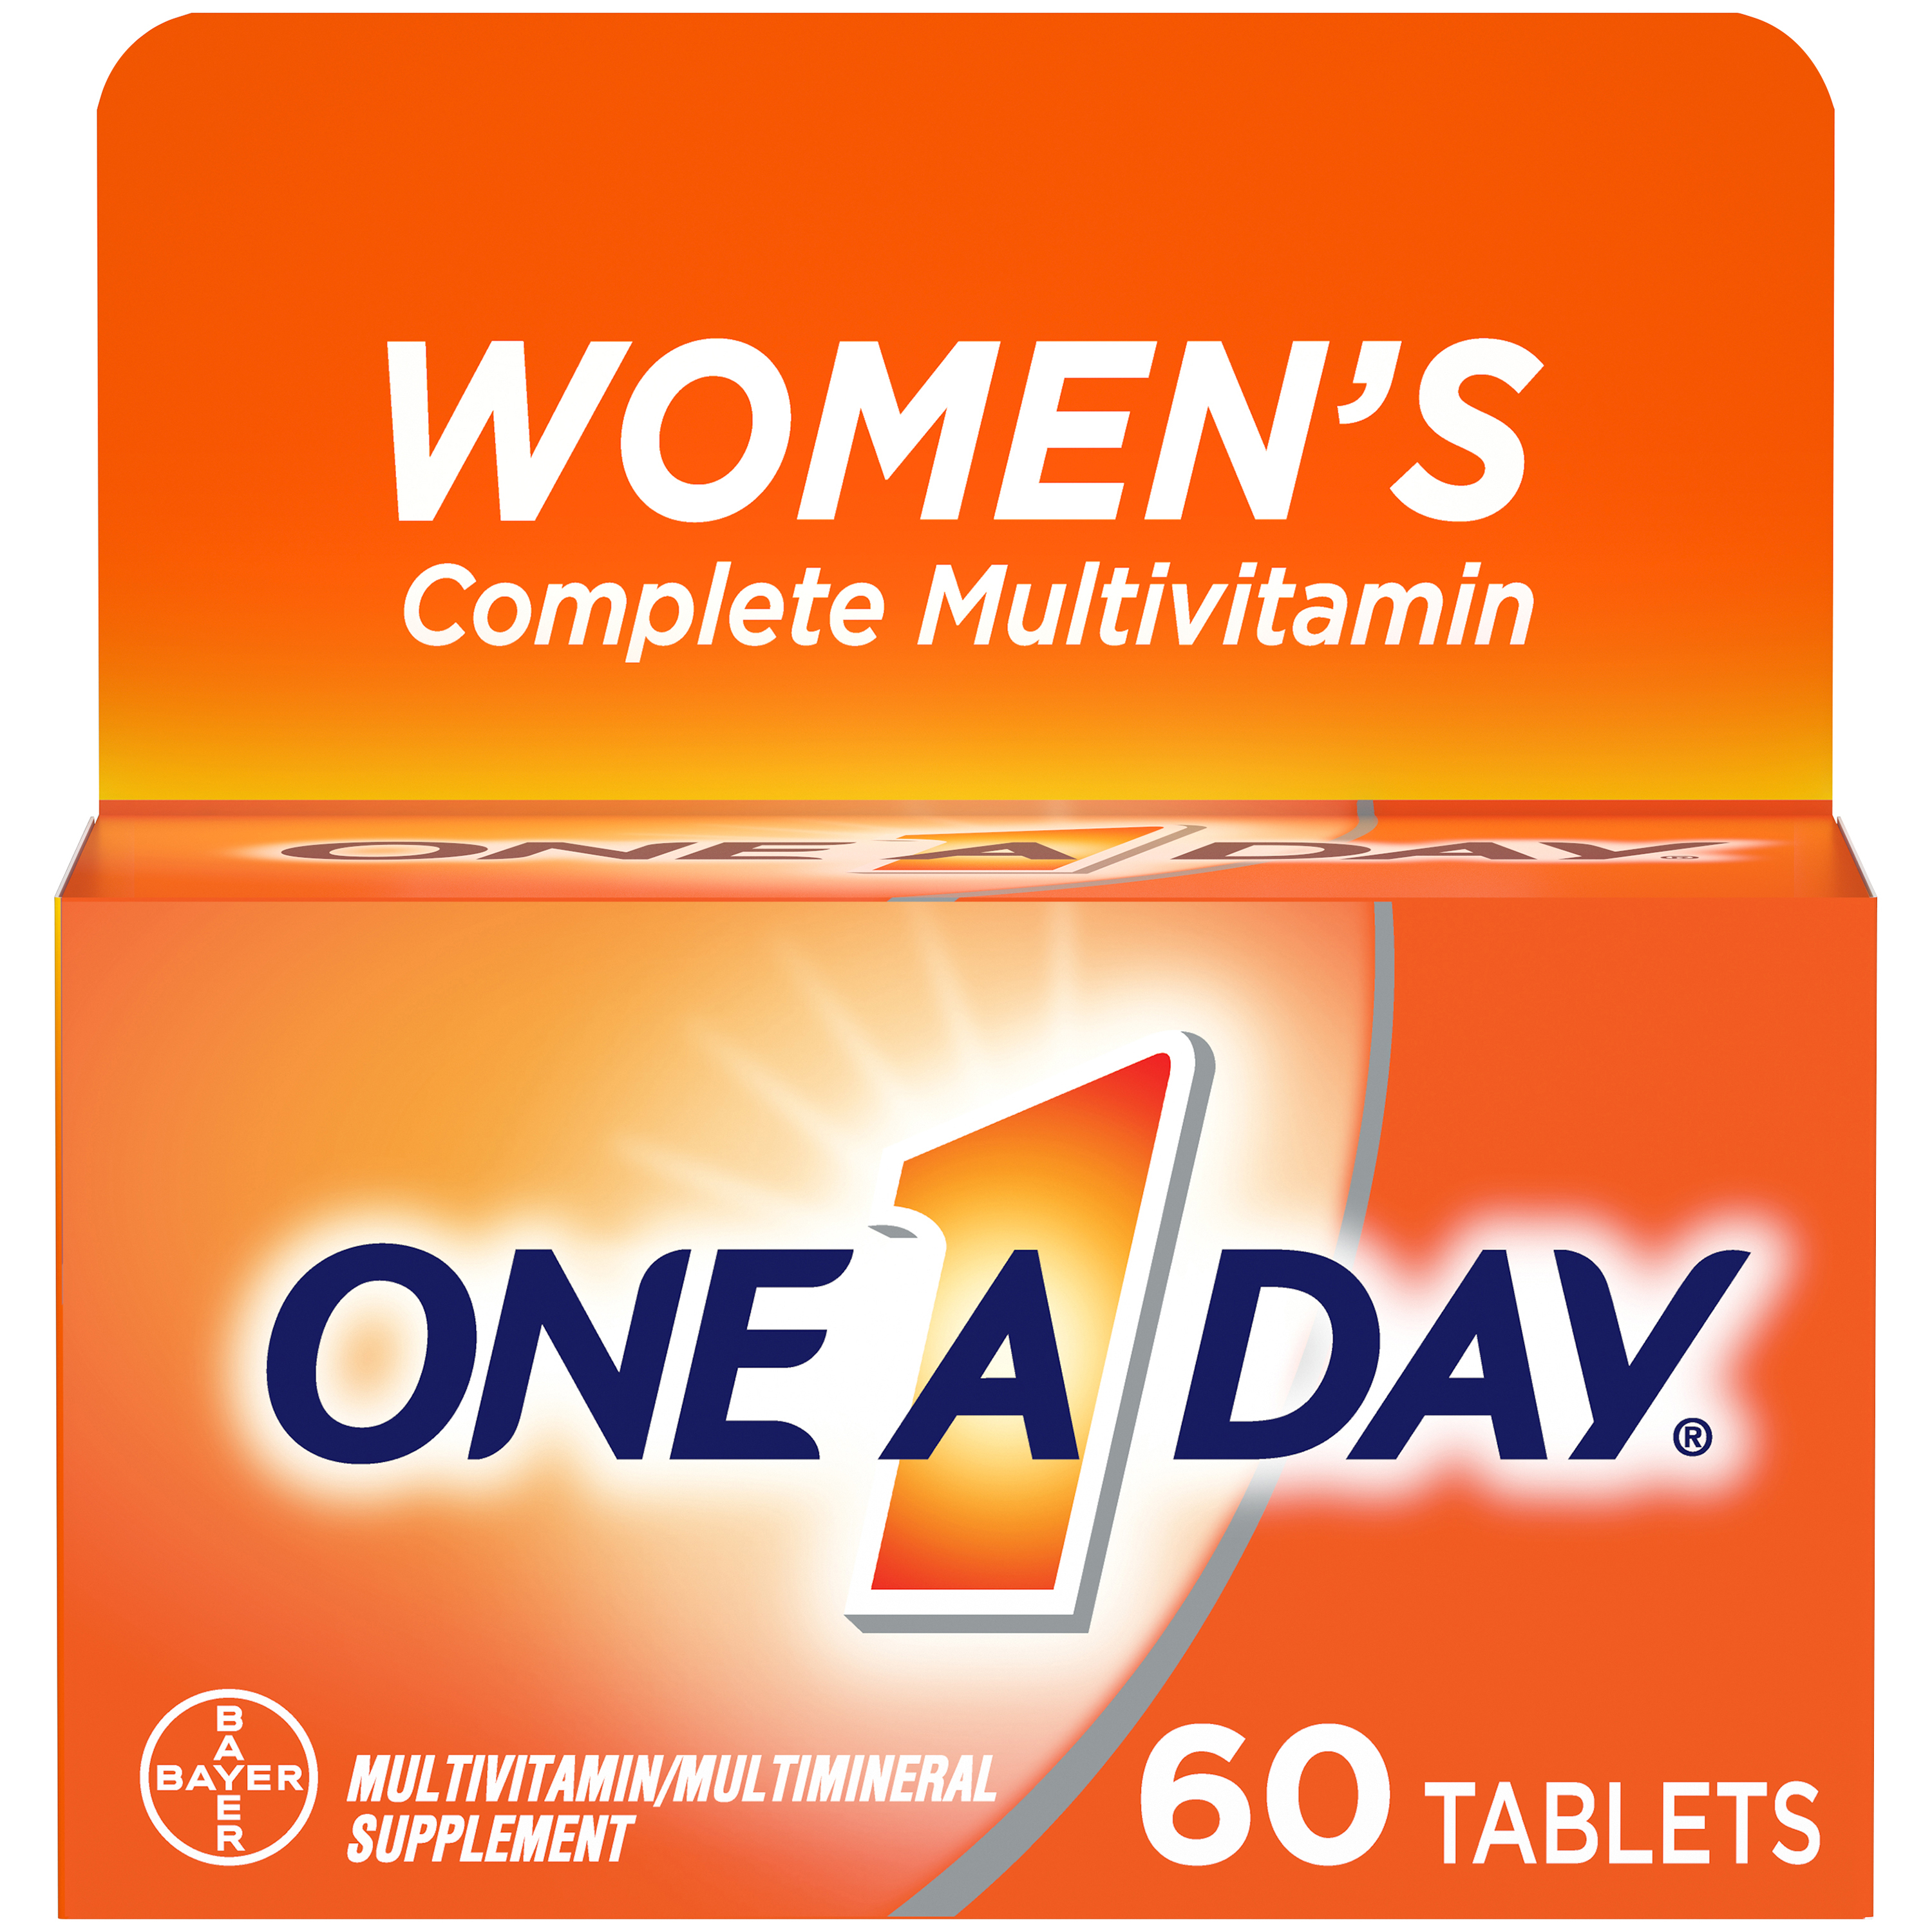 One A Day Women's Multivitamin Tablets, Multivitamins for Women, 60 Ct - image 1 of 21